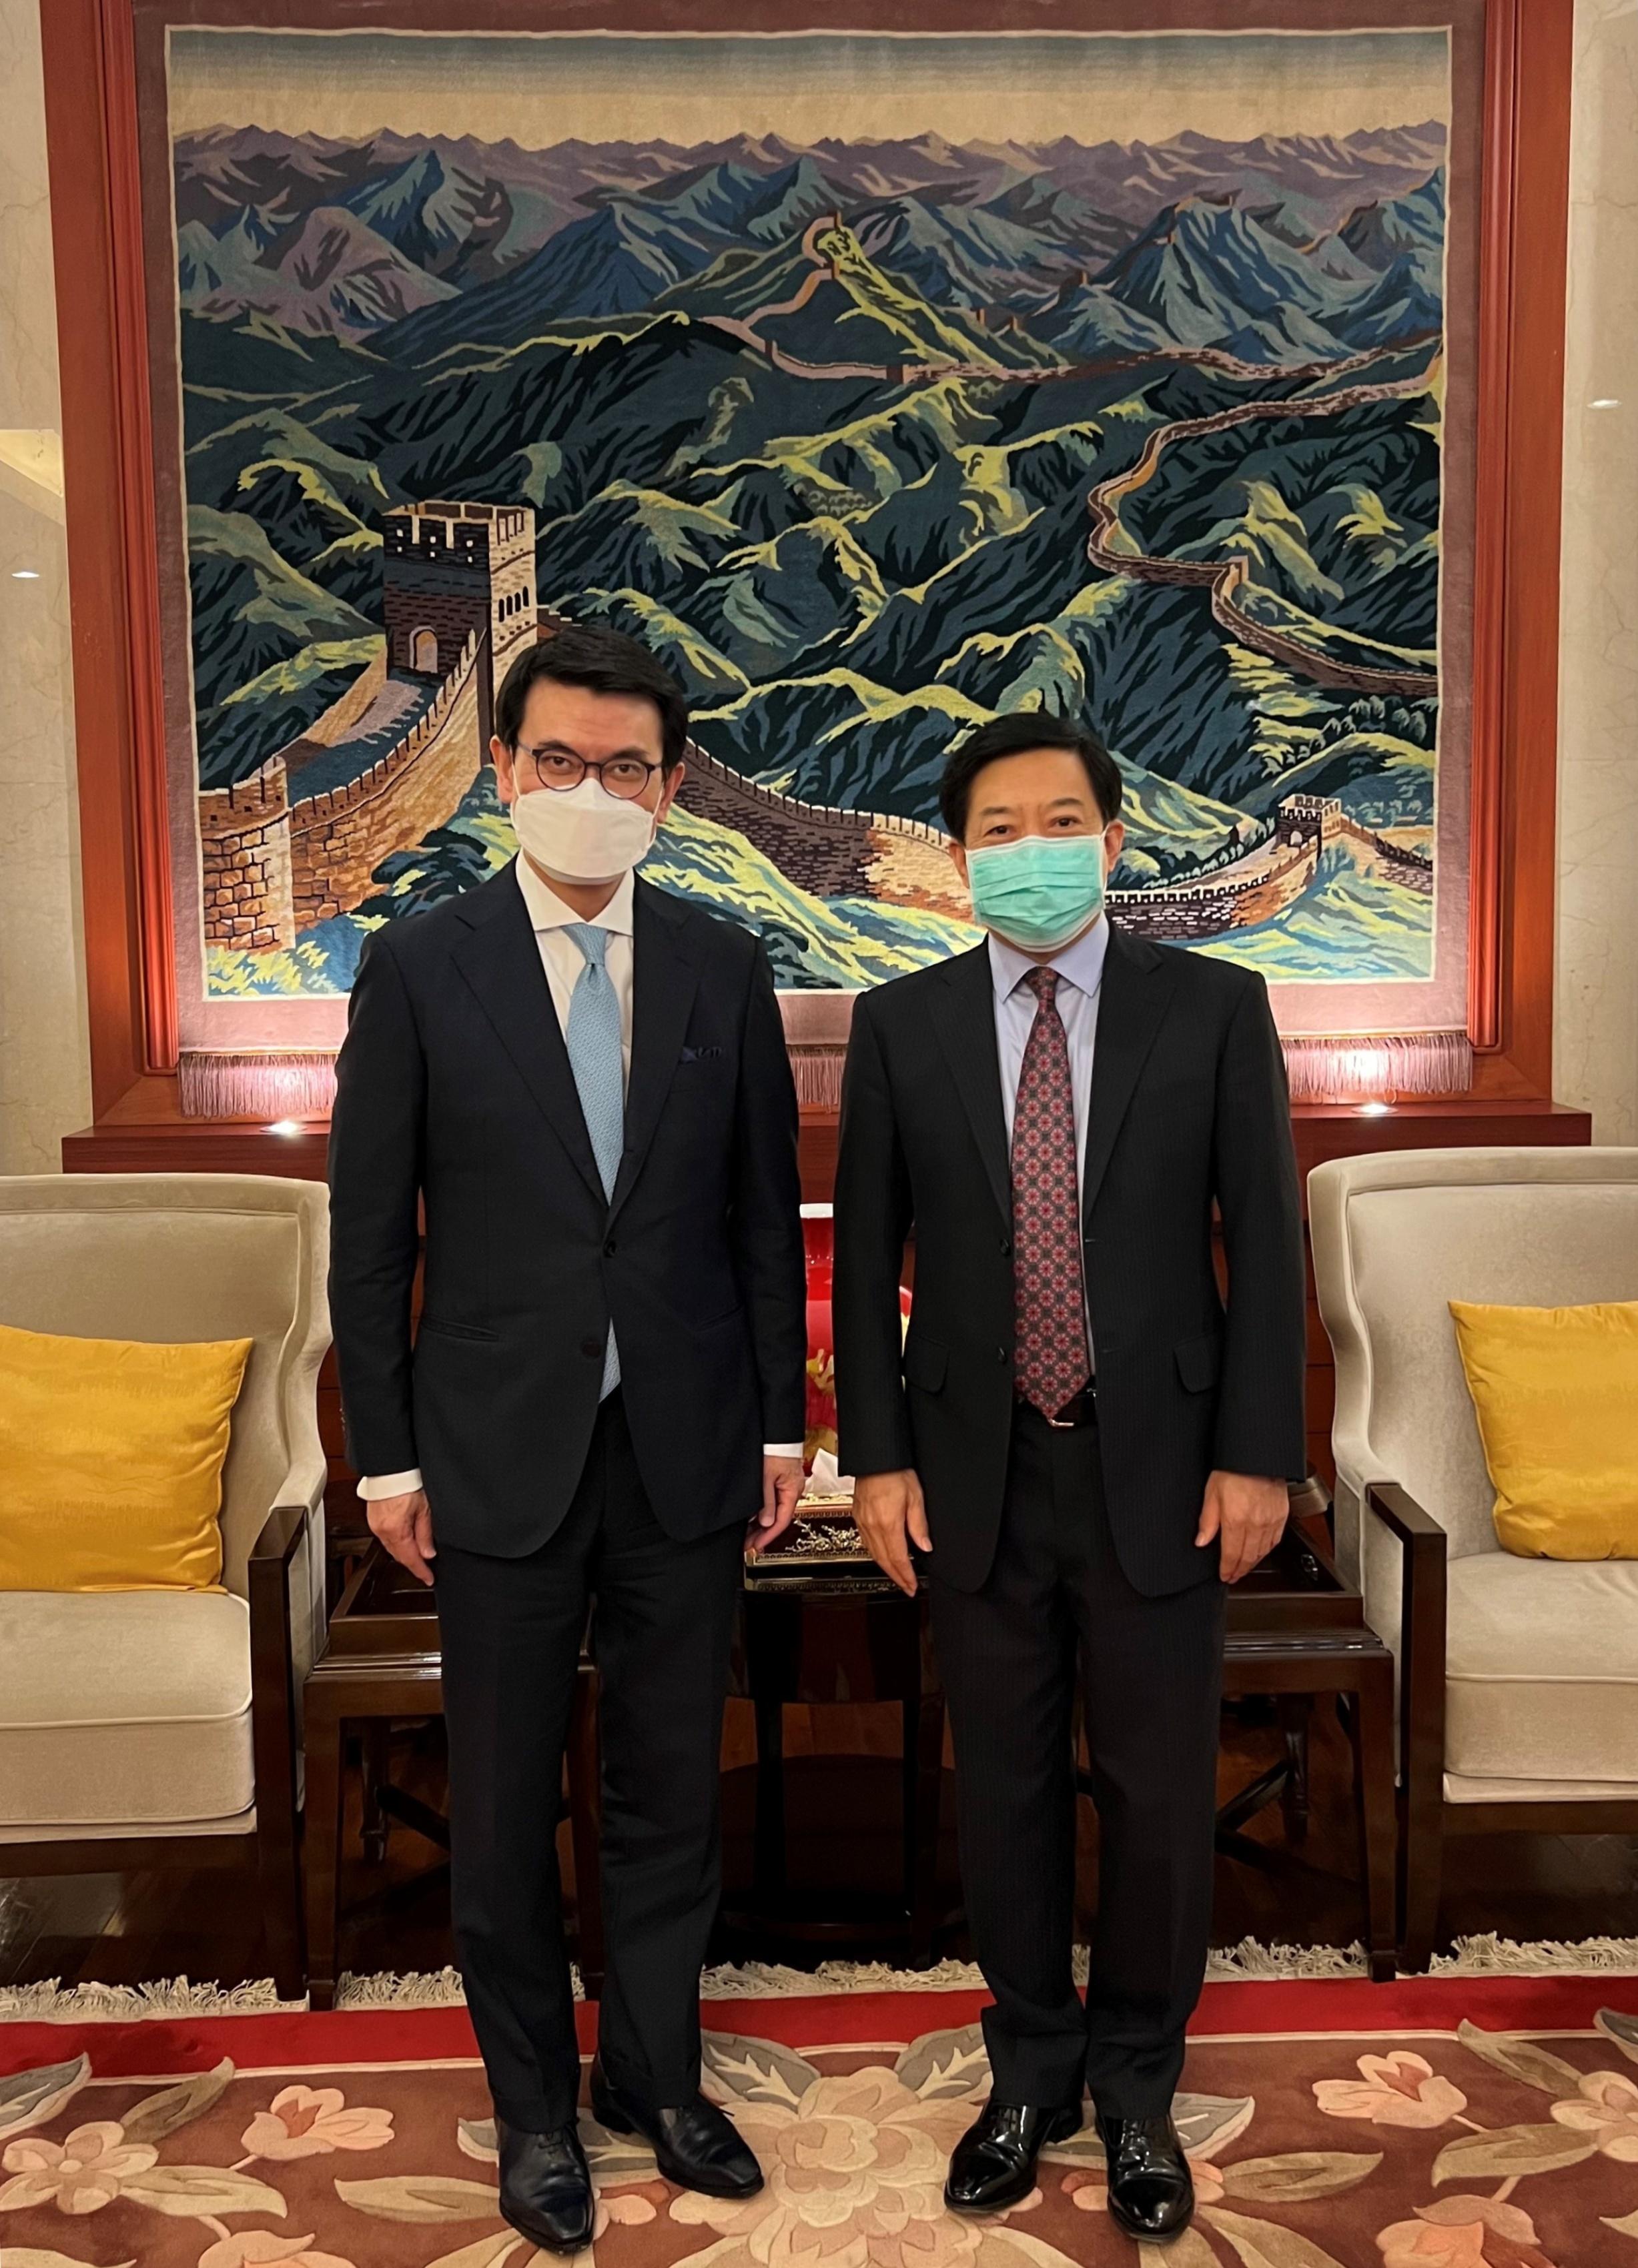 The Secretary for Commerce and Economic Development, Mr Edward Yau (left), paid a courtesy call on the Chinese Ambassador to Thailand, Mr Han Zhiqiang (right), in Bangkok, Thailand, today (May 19).
